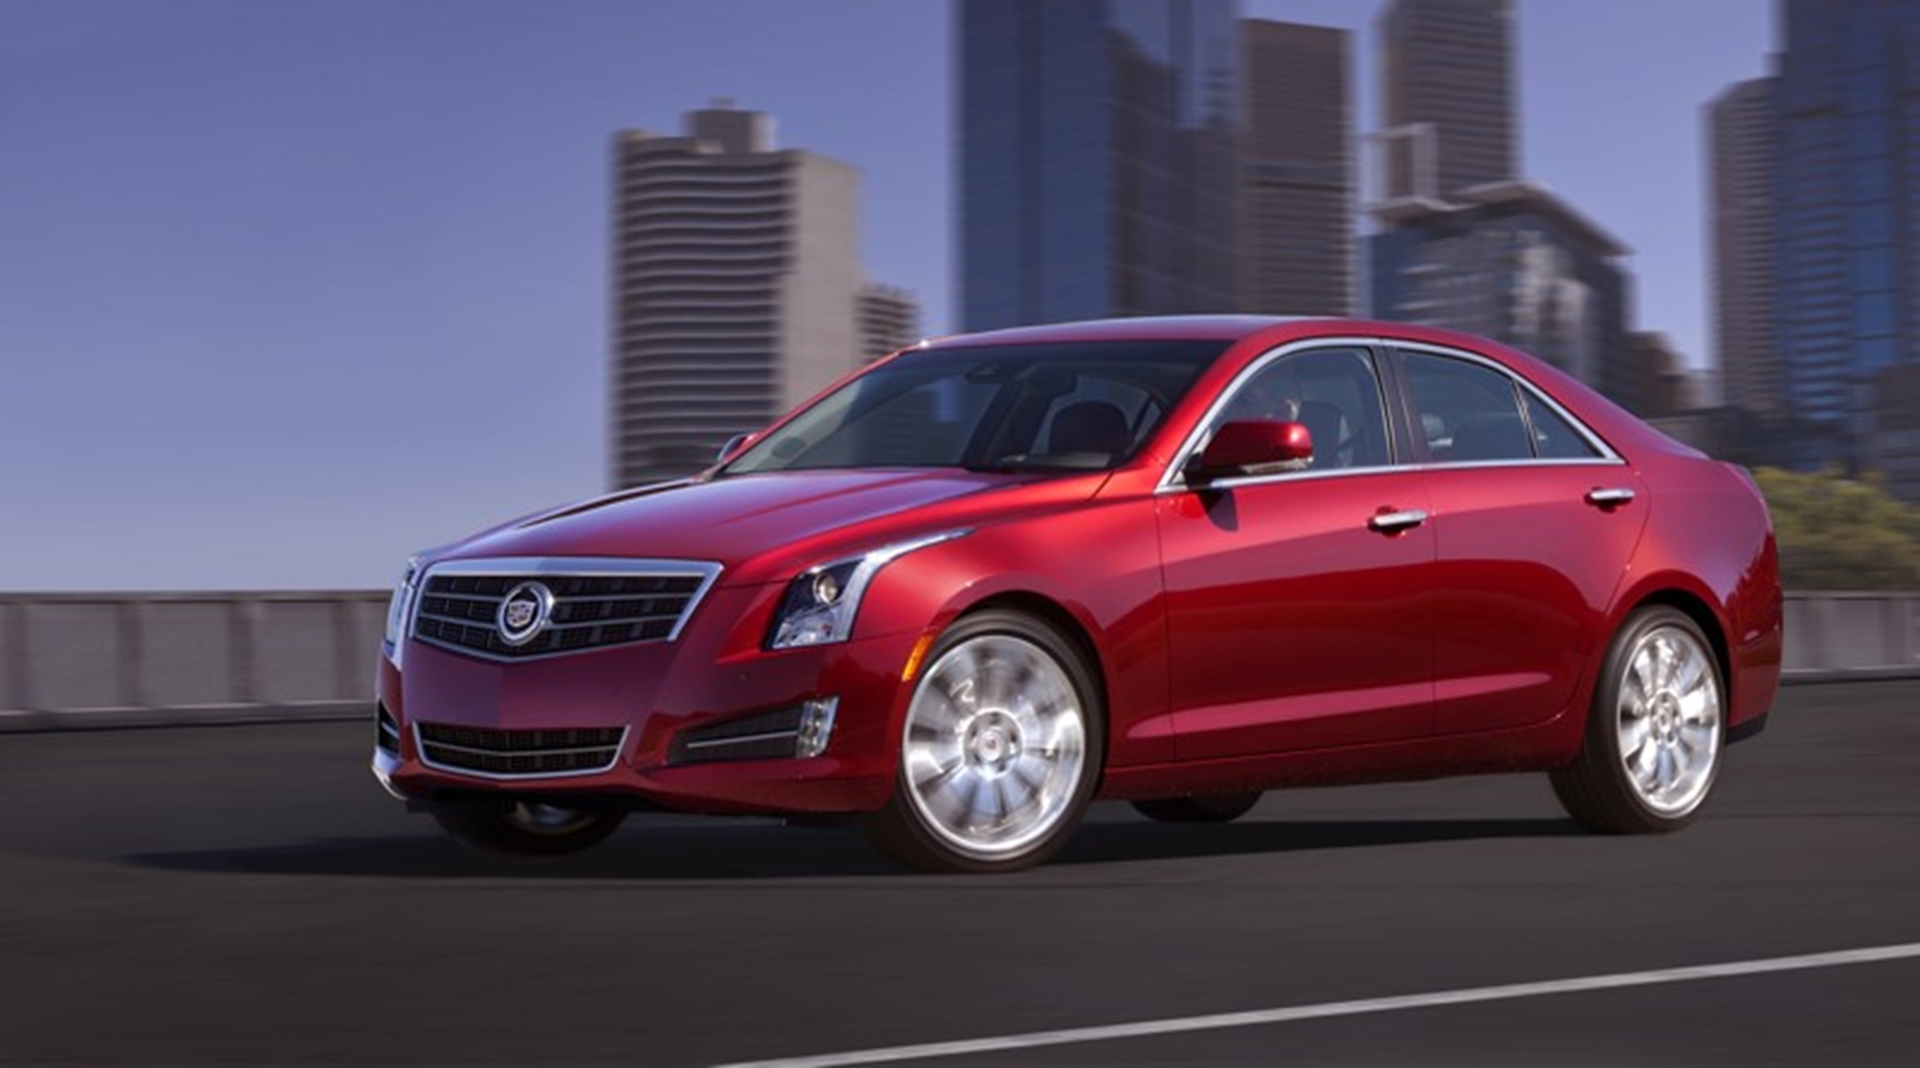 Cadillac ATS Delivers New Levels of Control and Refinement